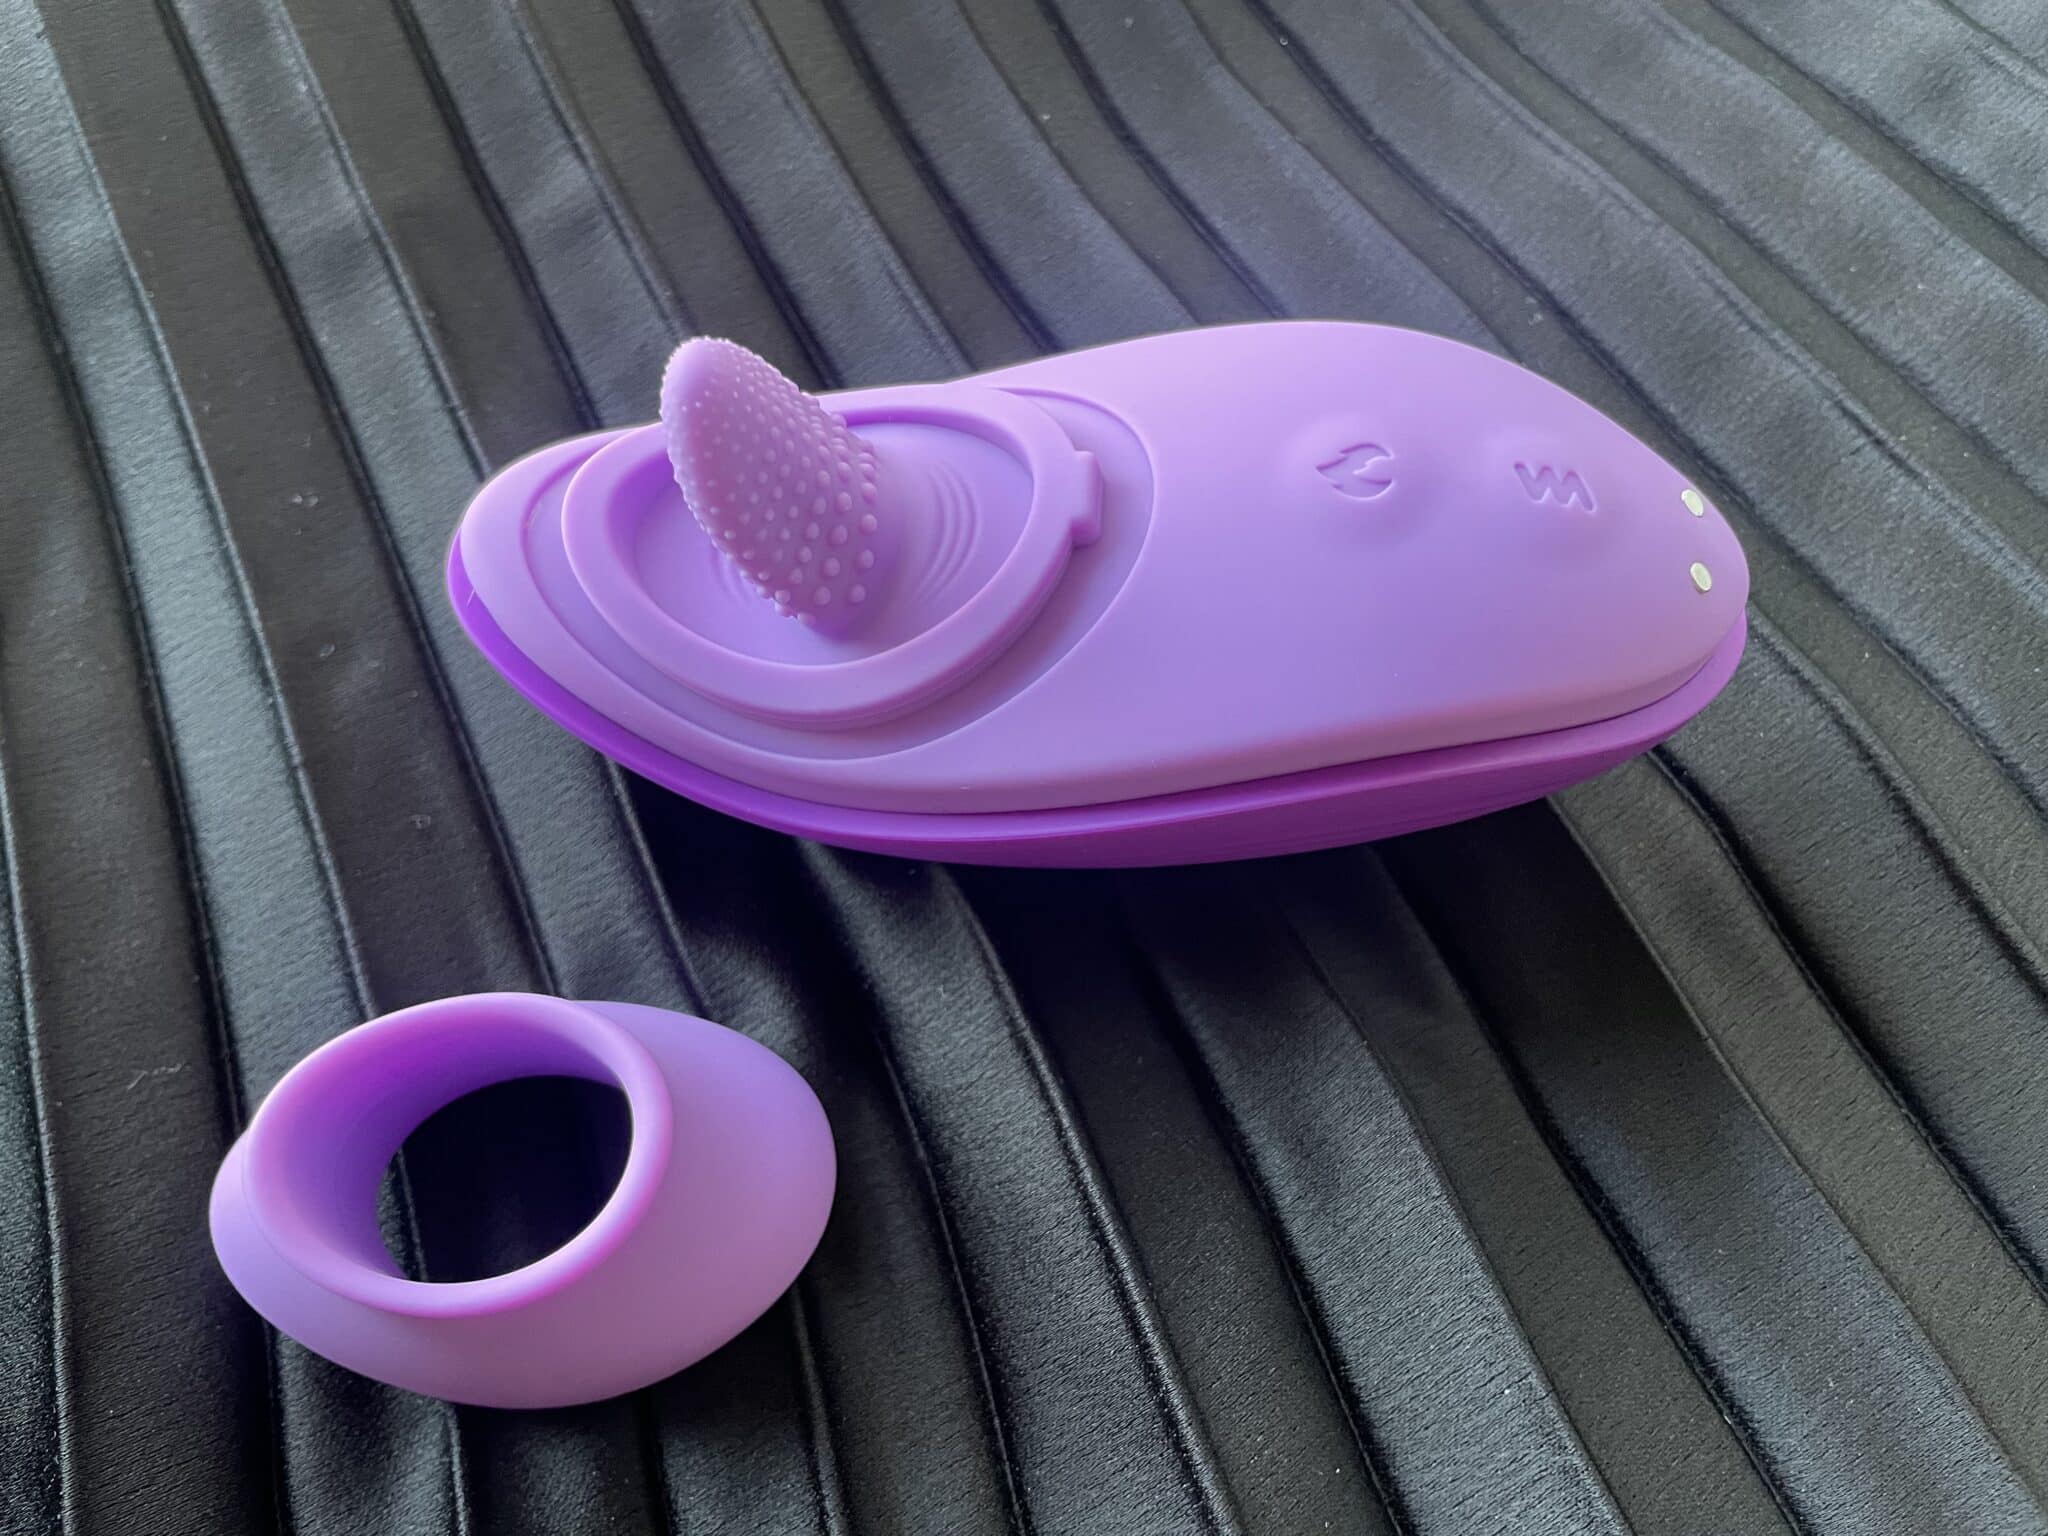 Fantasy For Her - Her Silicone Fun Tongue The Fantasy For Her - Her Silicone Fun Tongue: ease of use